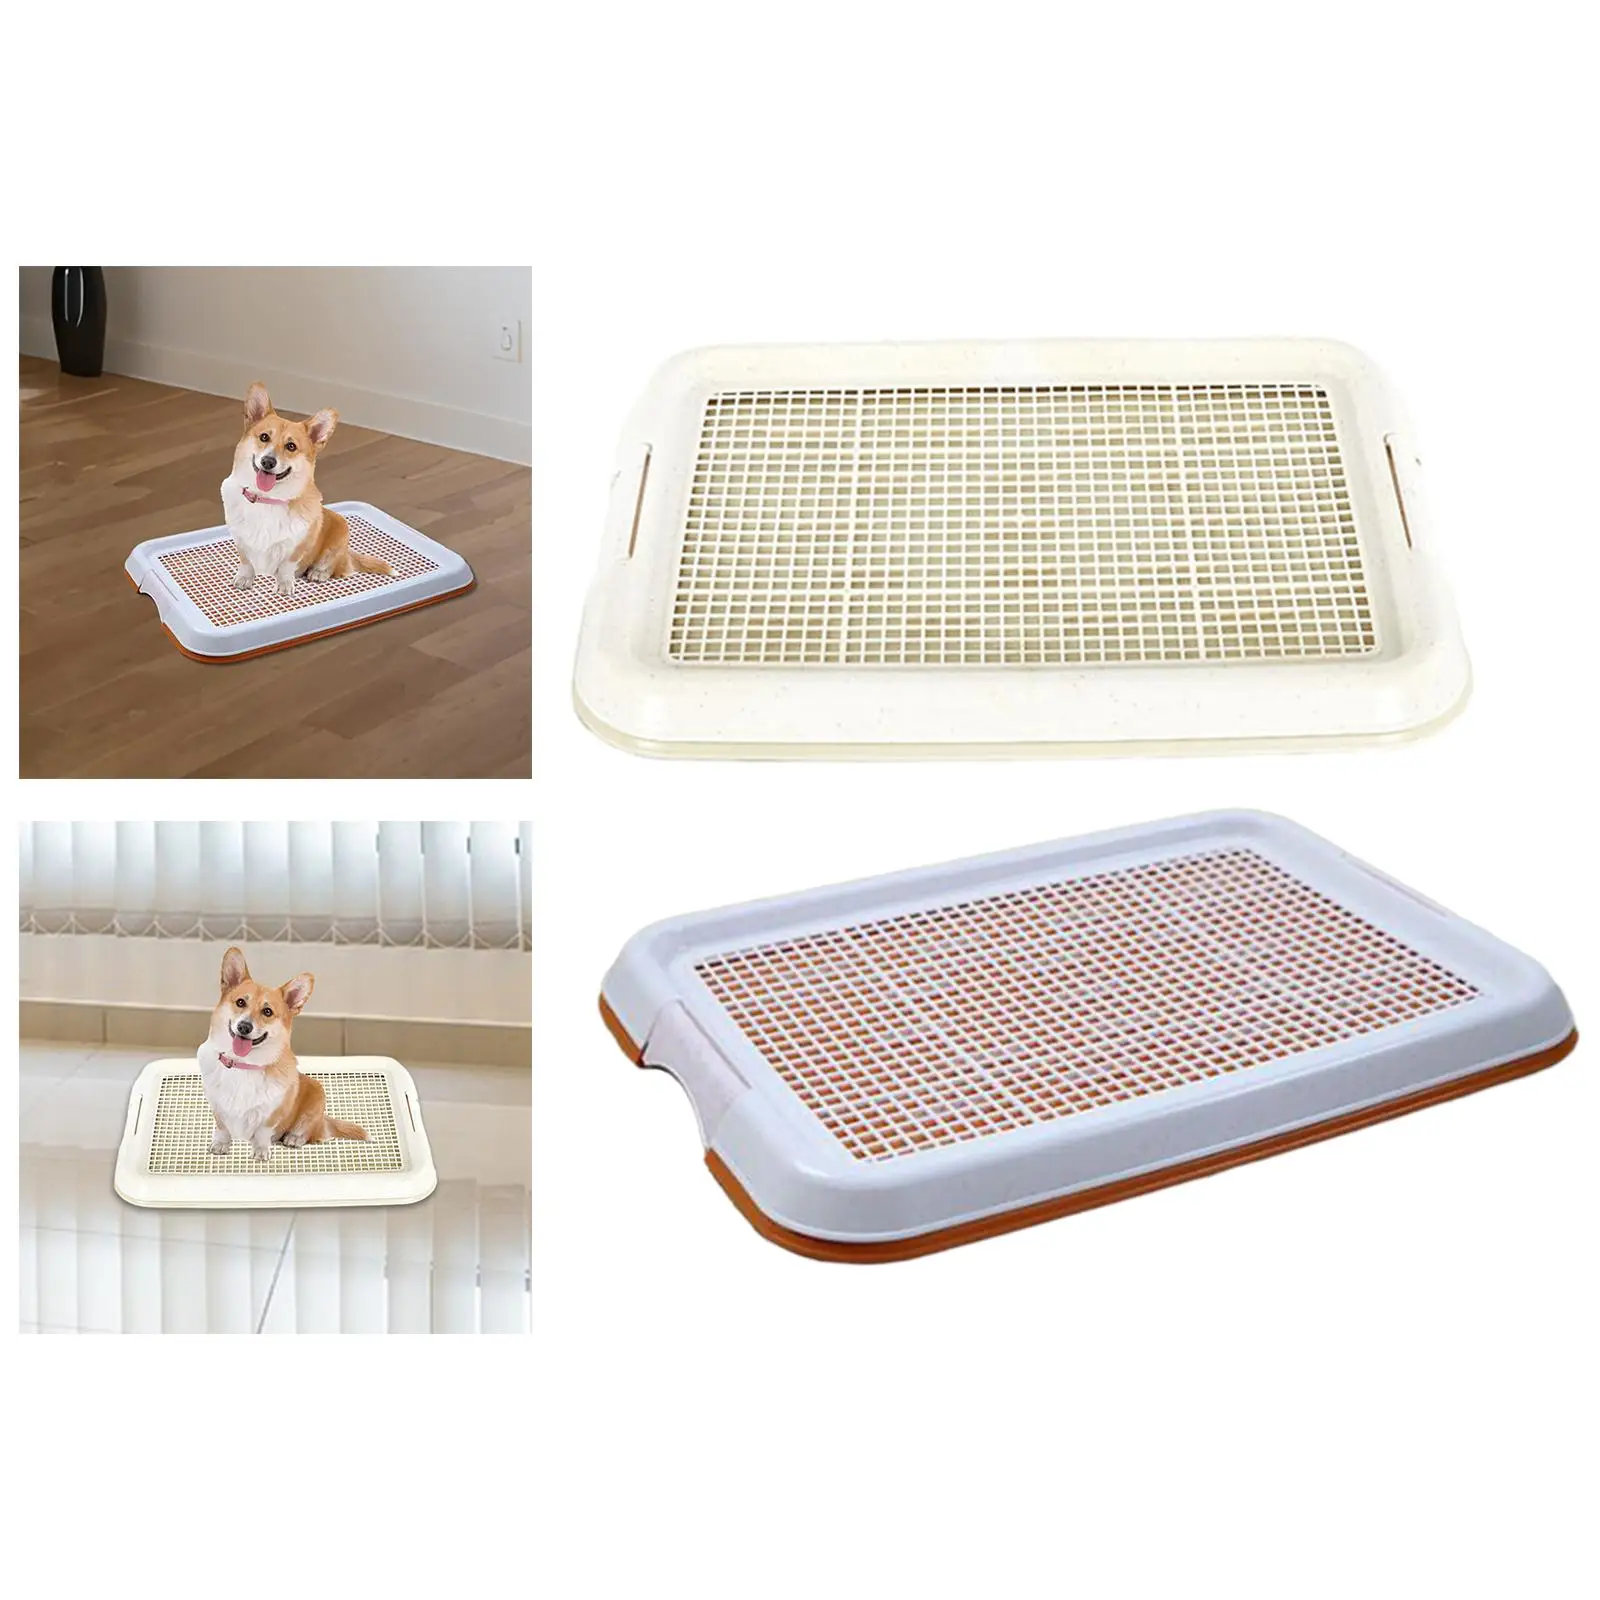 Dog Potty Toilet Training Tray, Pet Indoor Pads Holder, Indoor Potty Trainer for